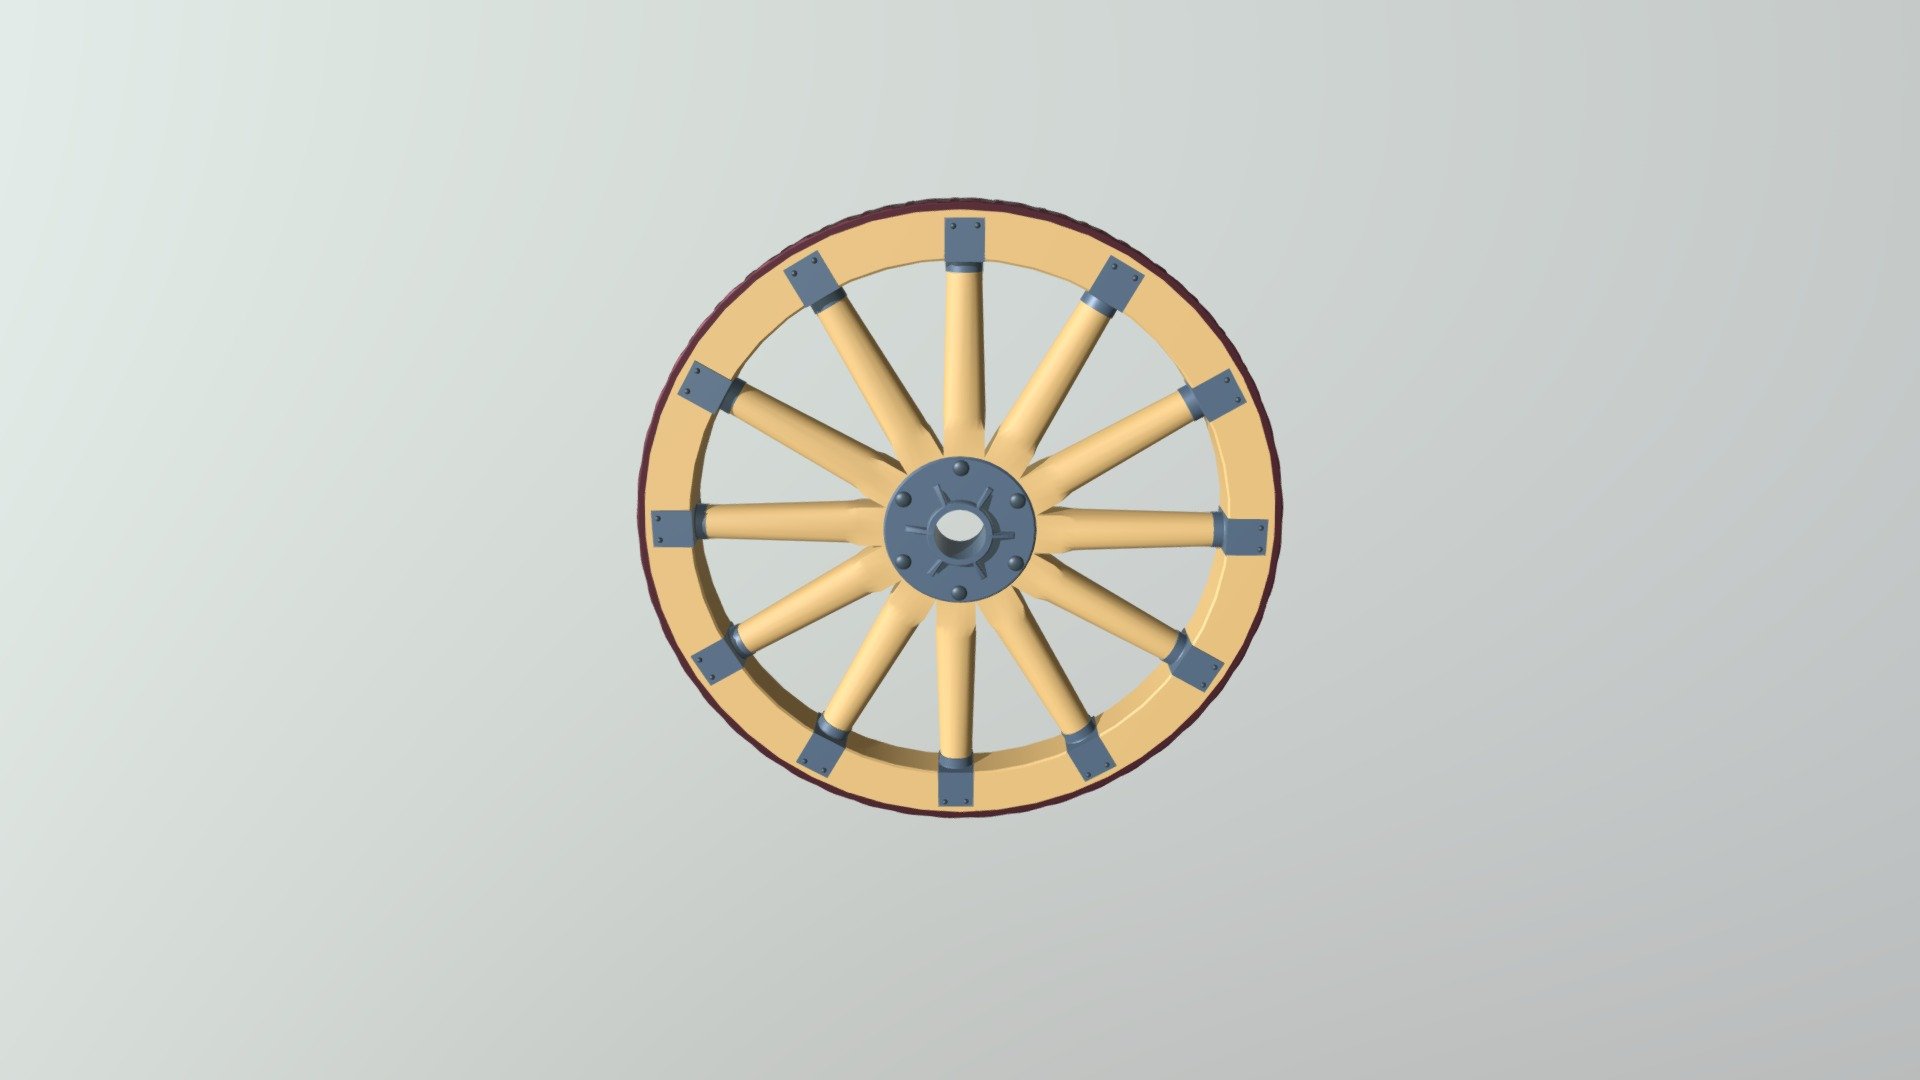 Exercise: Modelling a Wheel